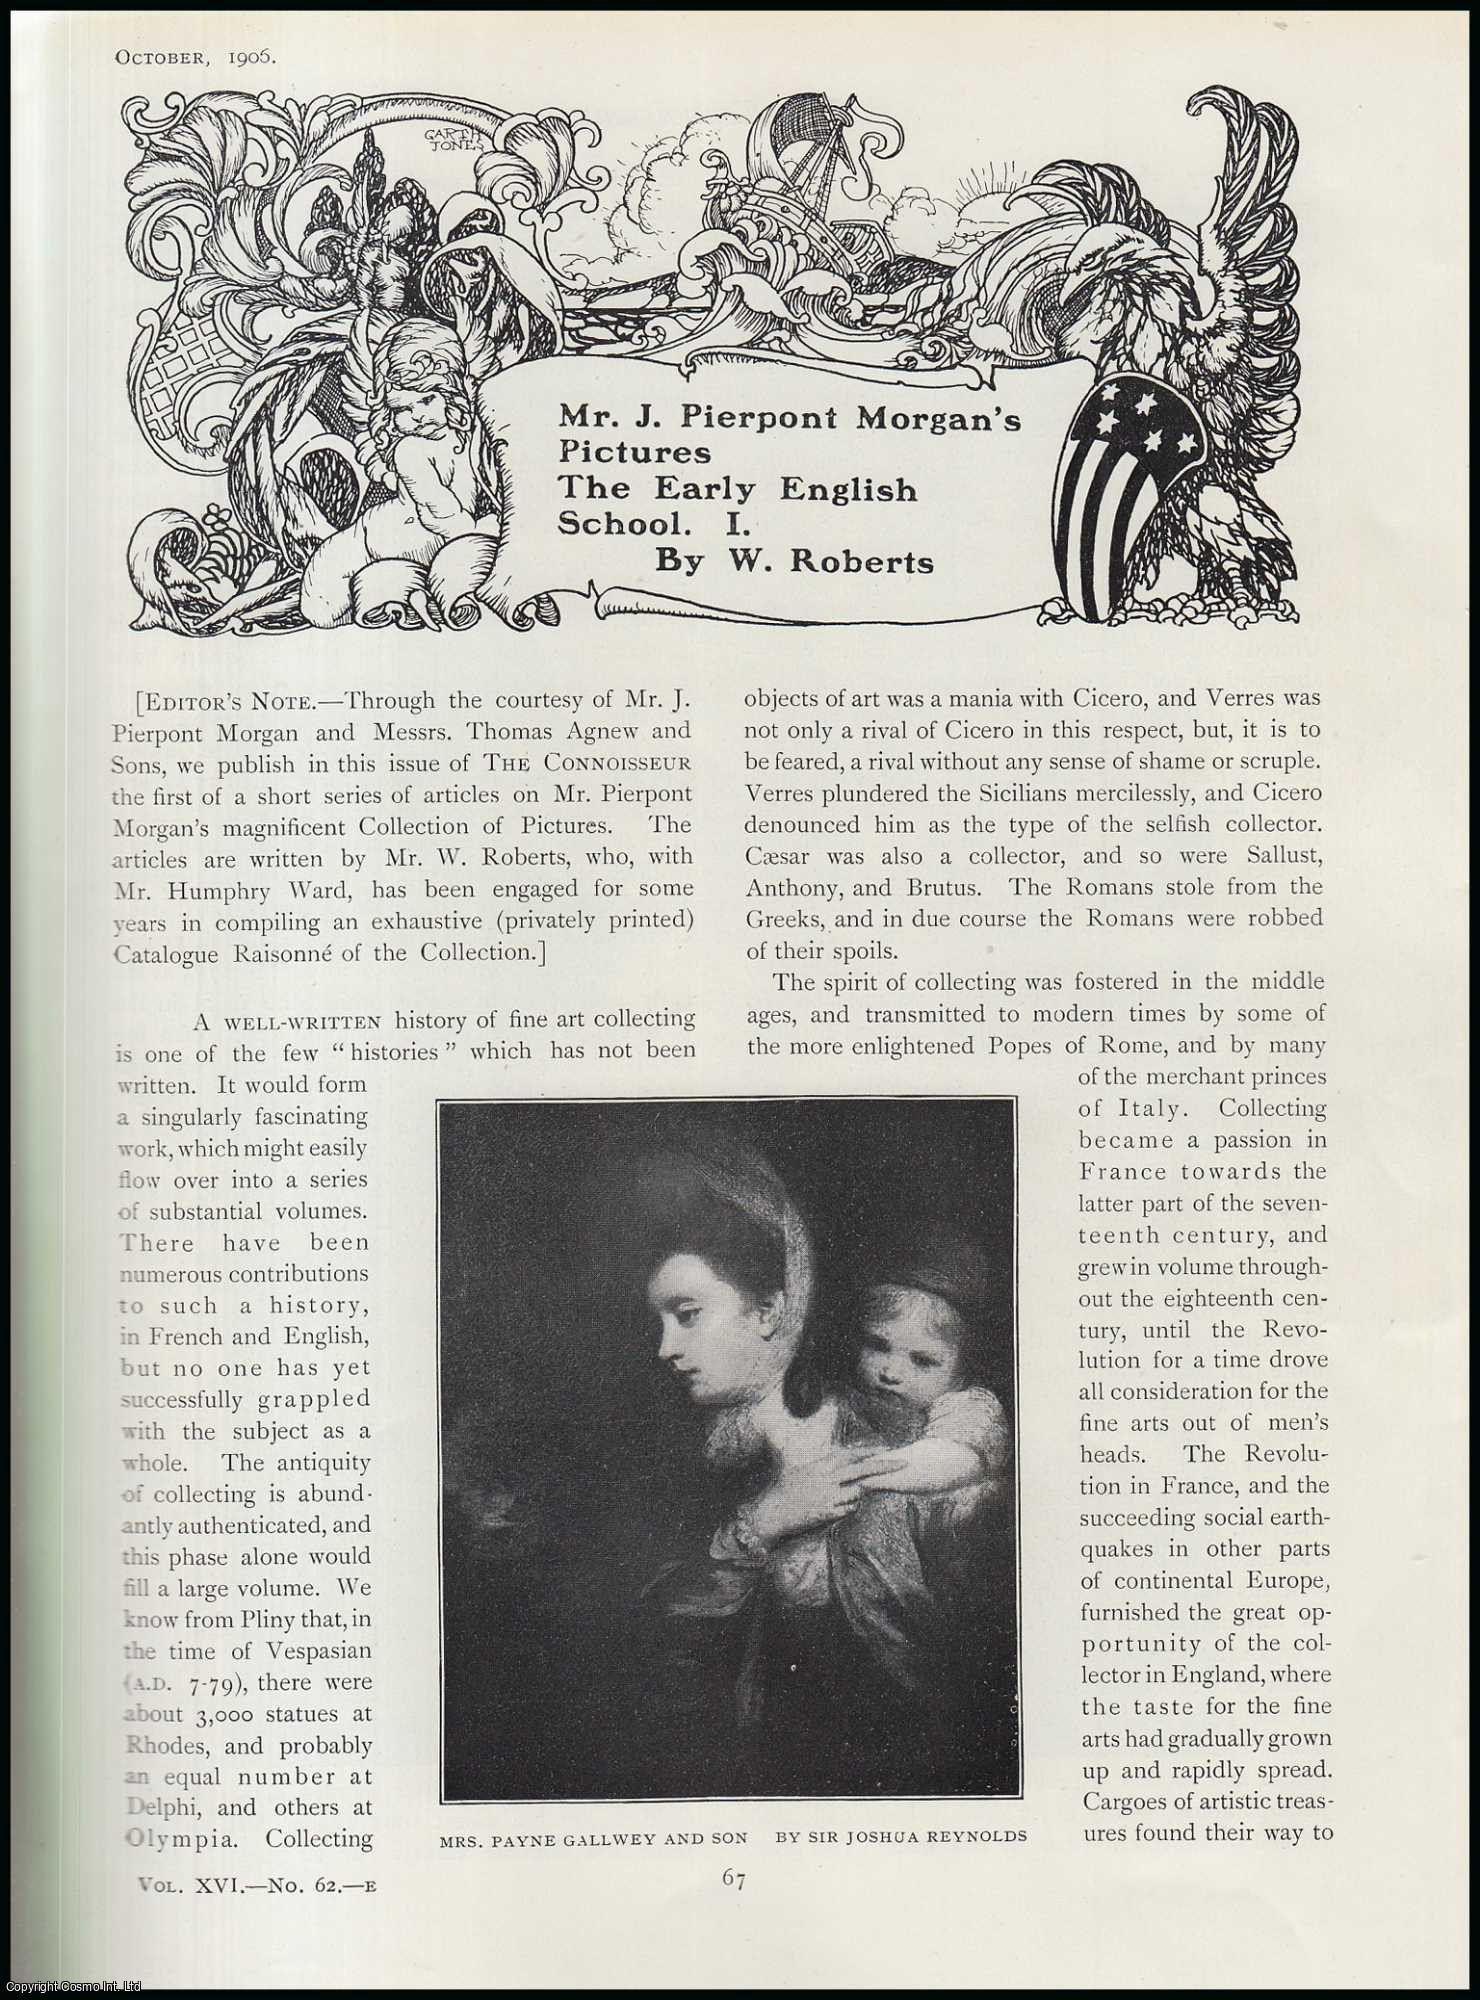 W. Roberts - Mr. J. Pierpont Morgan's Pictures (part 1) : The Early English School. An original article from The Connoisseur, 1906.